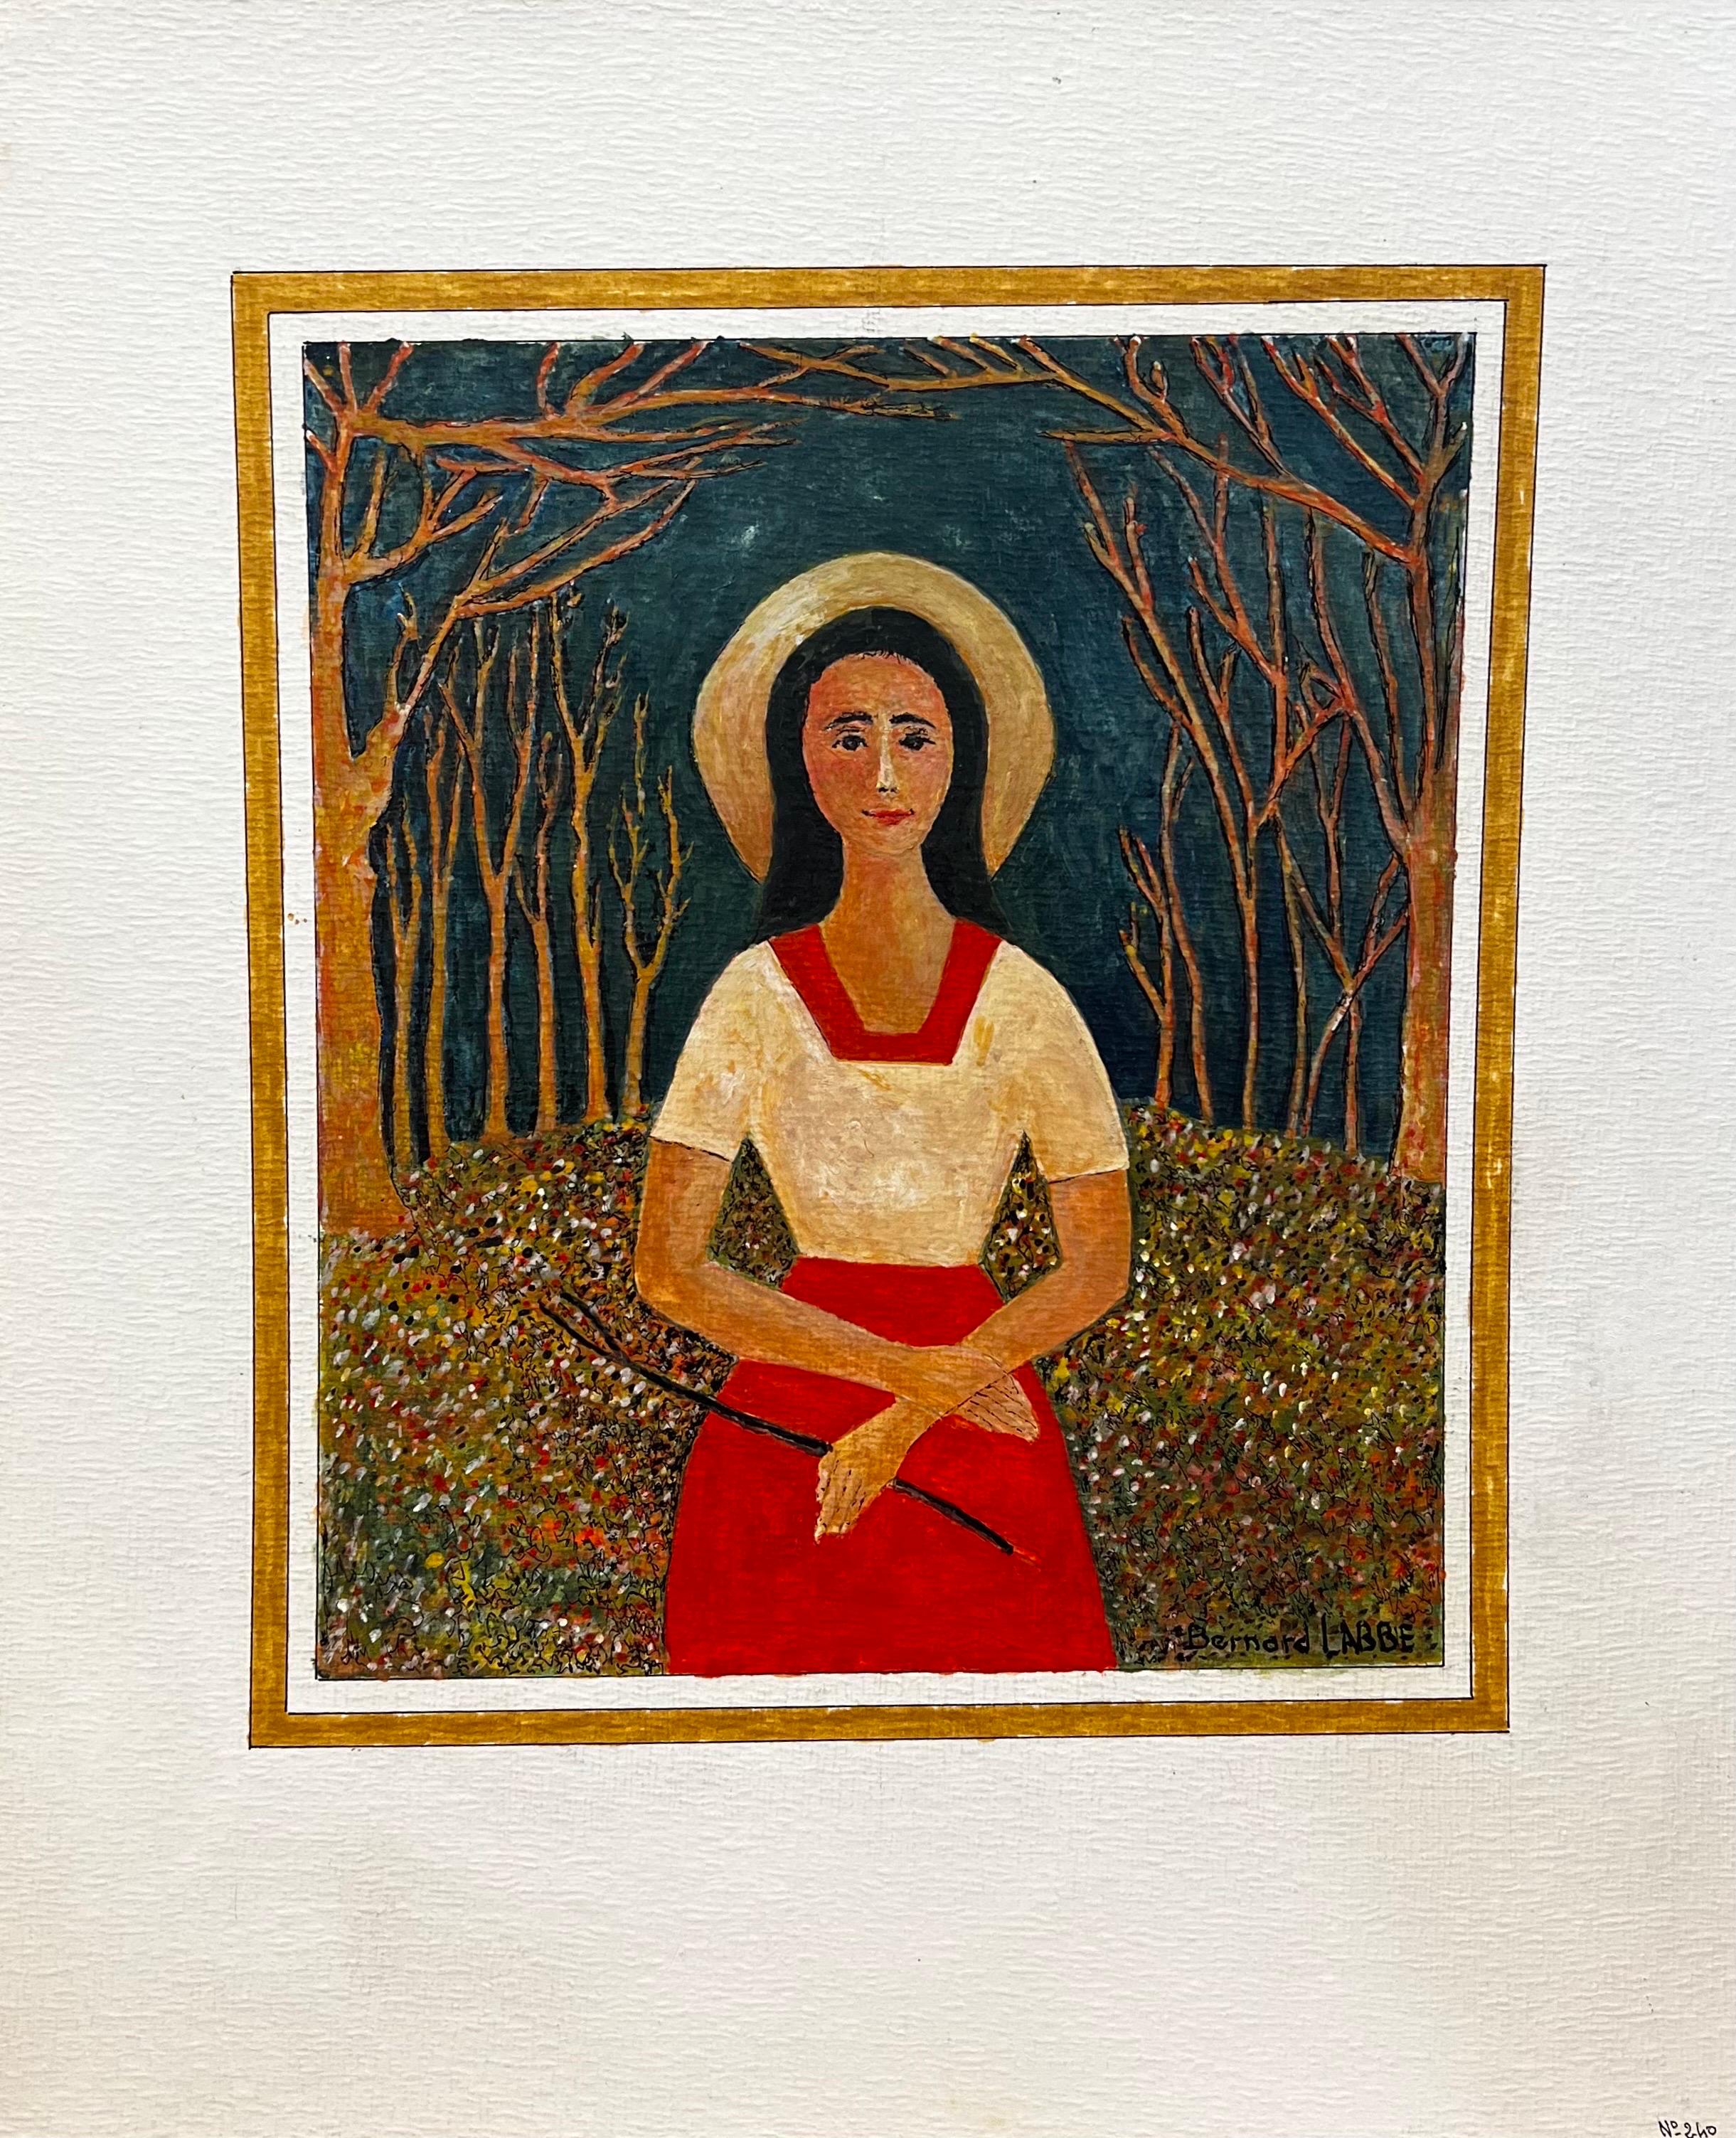 Portrait
by Bernard Labbe (French mid 20th century)
original gouache on artist paper, unframed
size: 19.5 x 16.5 inches
condition: very good and ready to be enjoyed

provenance: the artists atelier/ studio, France (stamped verso)